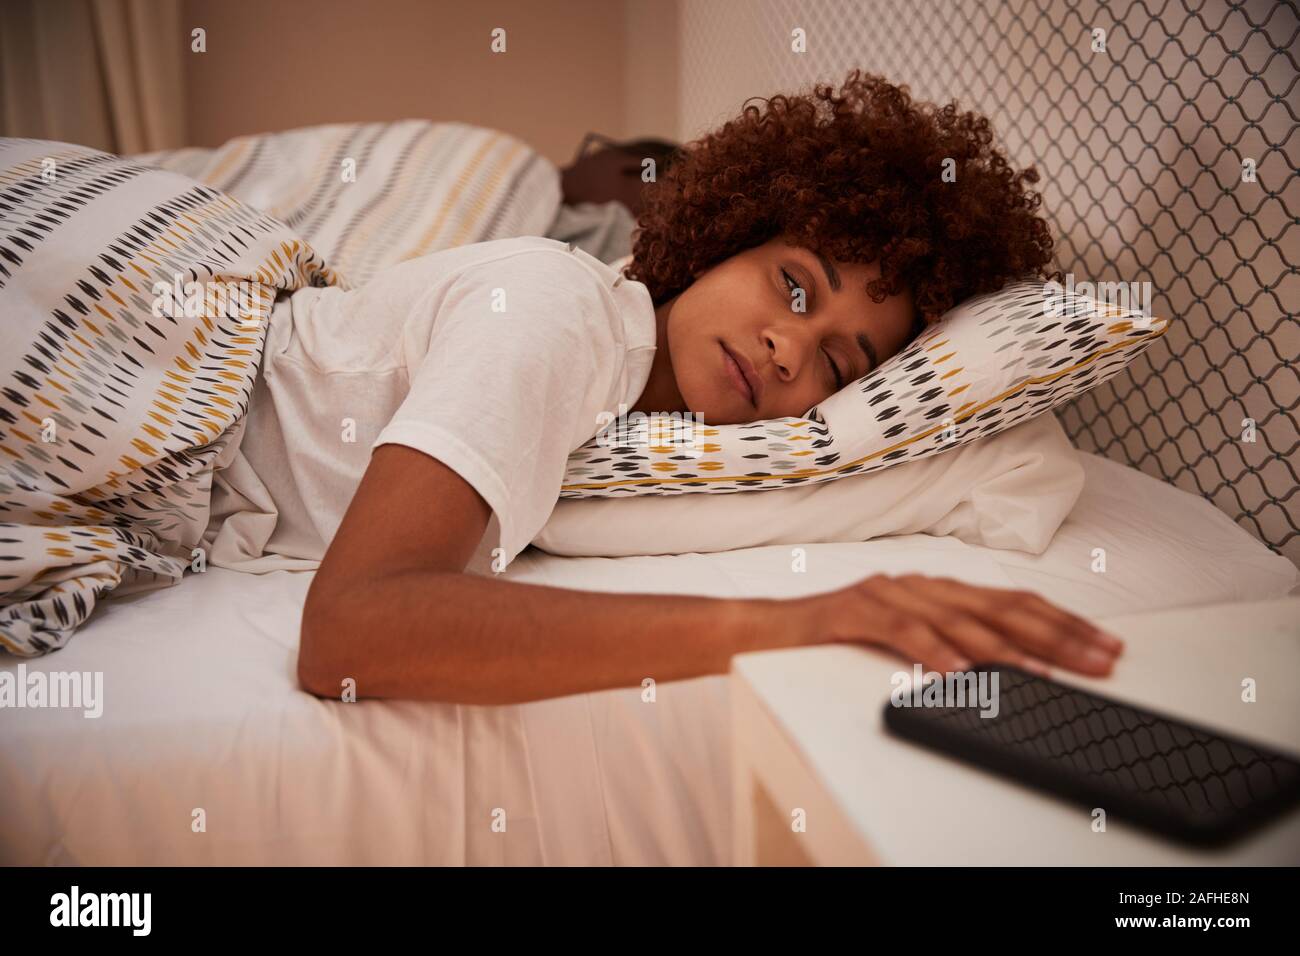 Millennial African American woman half asleep in bed, reaching out for her smartphone, close up Stock Photo